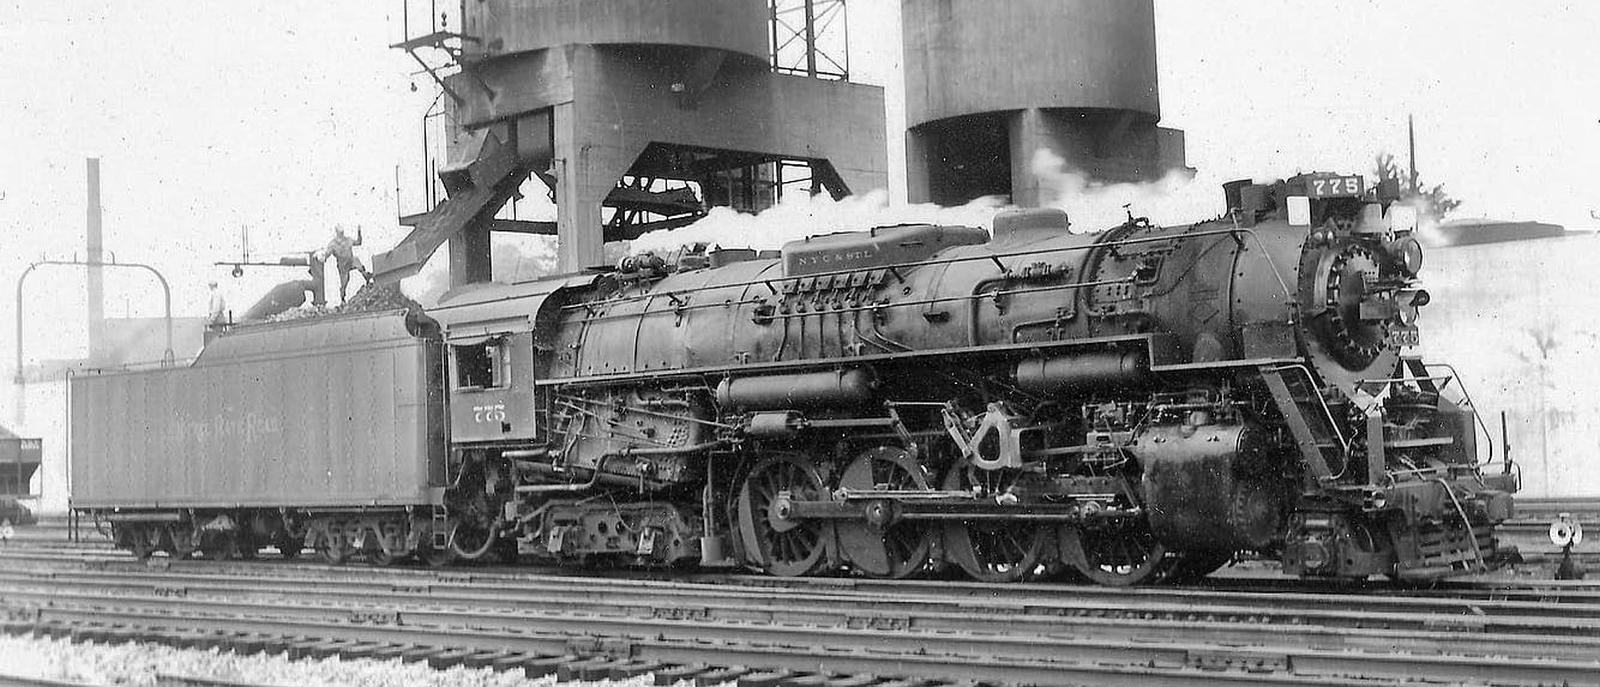 S-3 No. 775 in August 1956 at Cleveland, Ohio